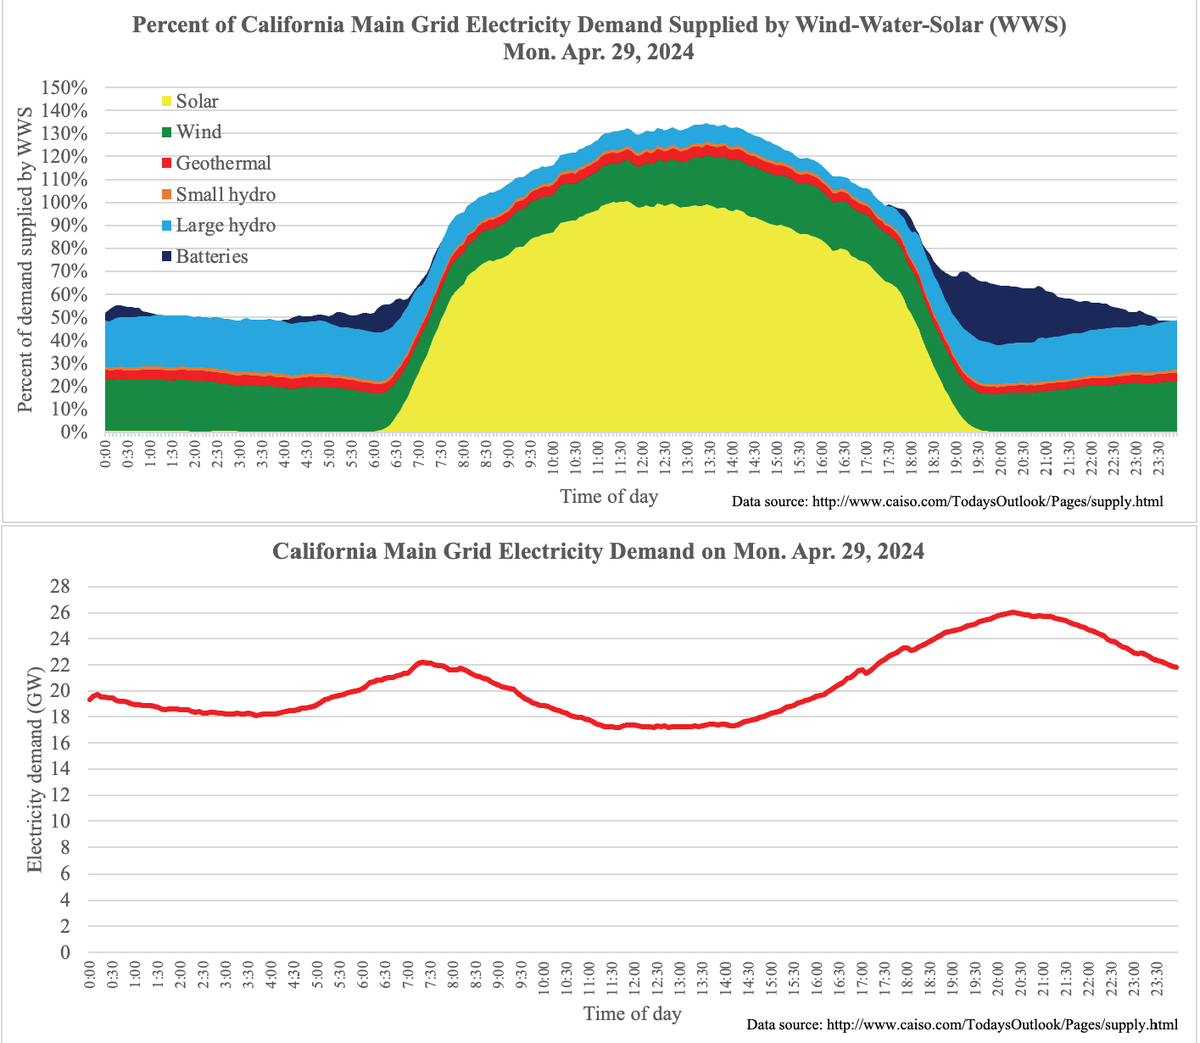 Two more records fall Mon, Apr 30 in Calif 1) 24-hour min #WindWaterSolar reached 48.4% (prev record 47.7%) 2) Peak battery output rose to 6.76 GW (prev record 6.52 GW) Also, peak WWS: 134.5% of demand 24-h avg WWS: 79.2% of demand Batteries shifted 4.4% electricity to night